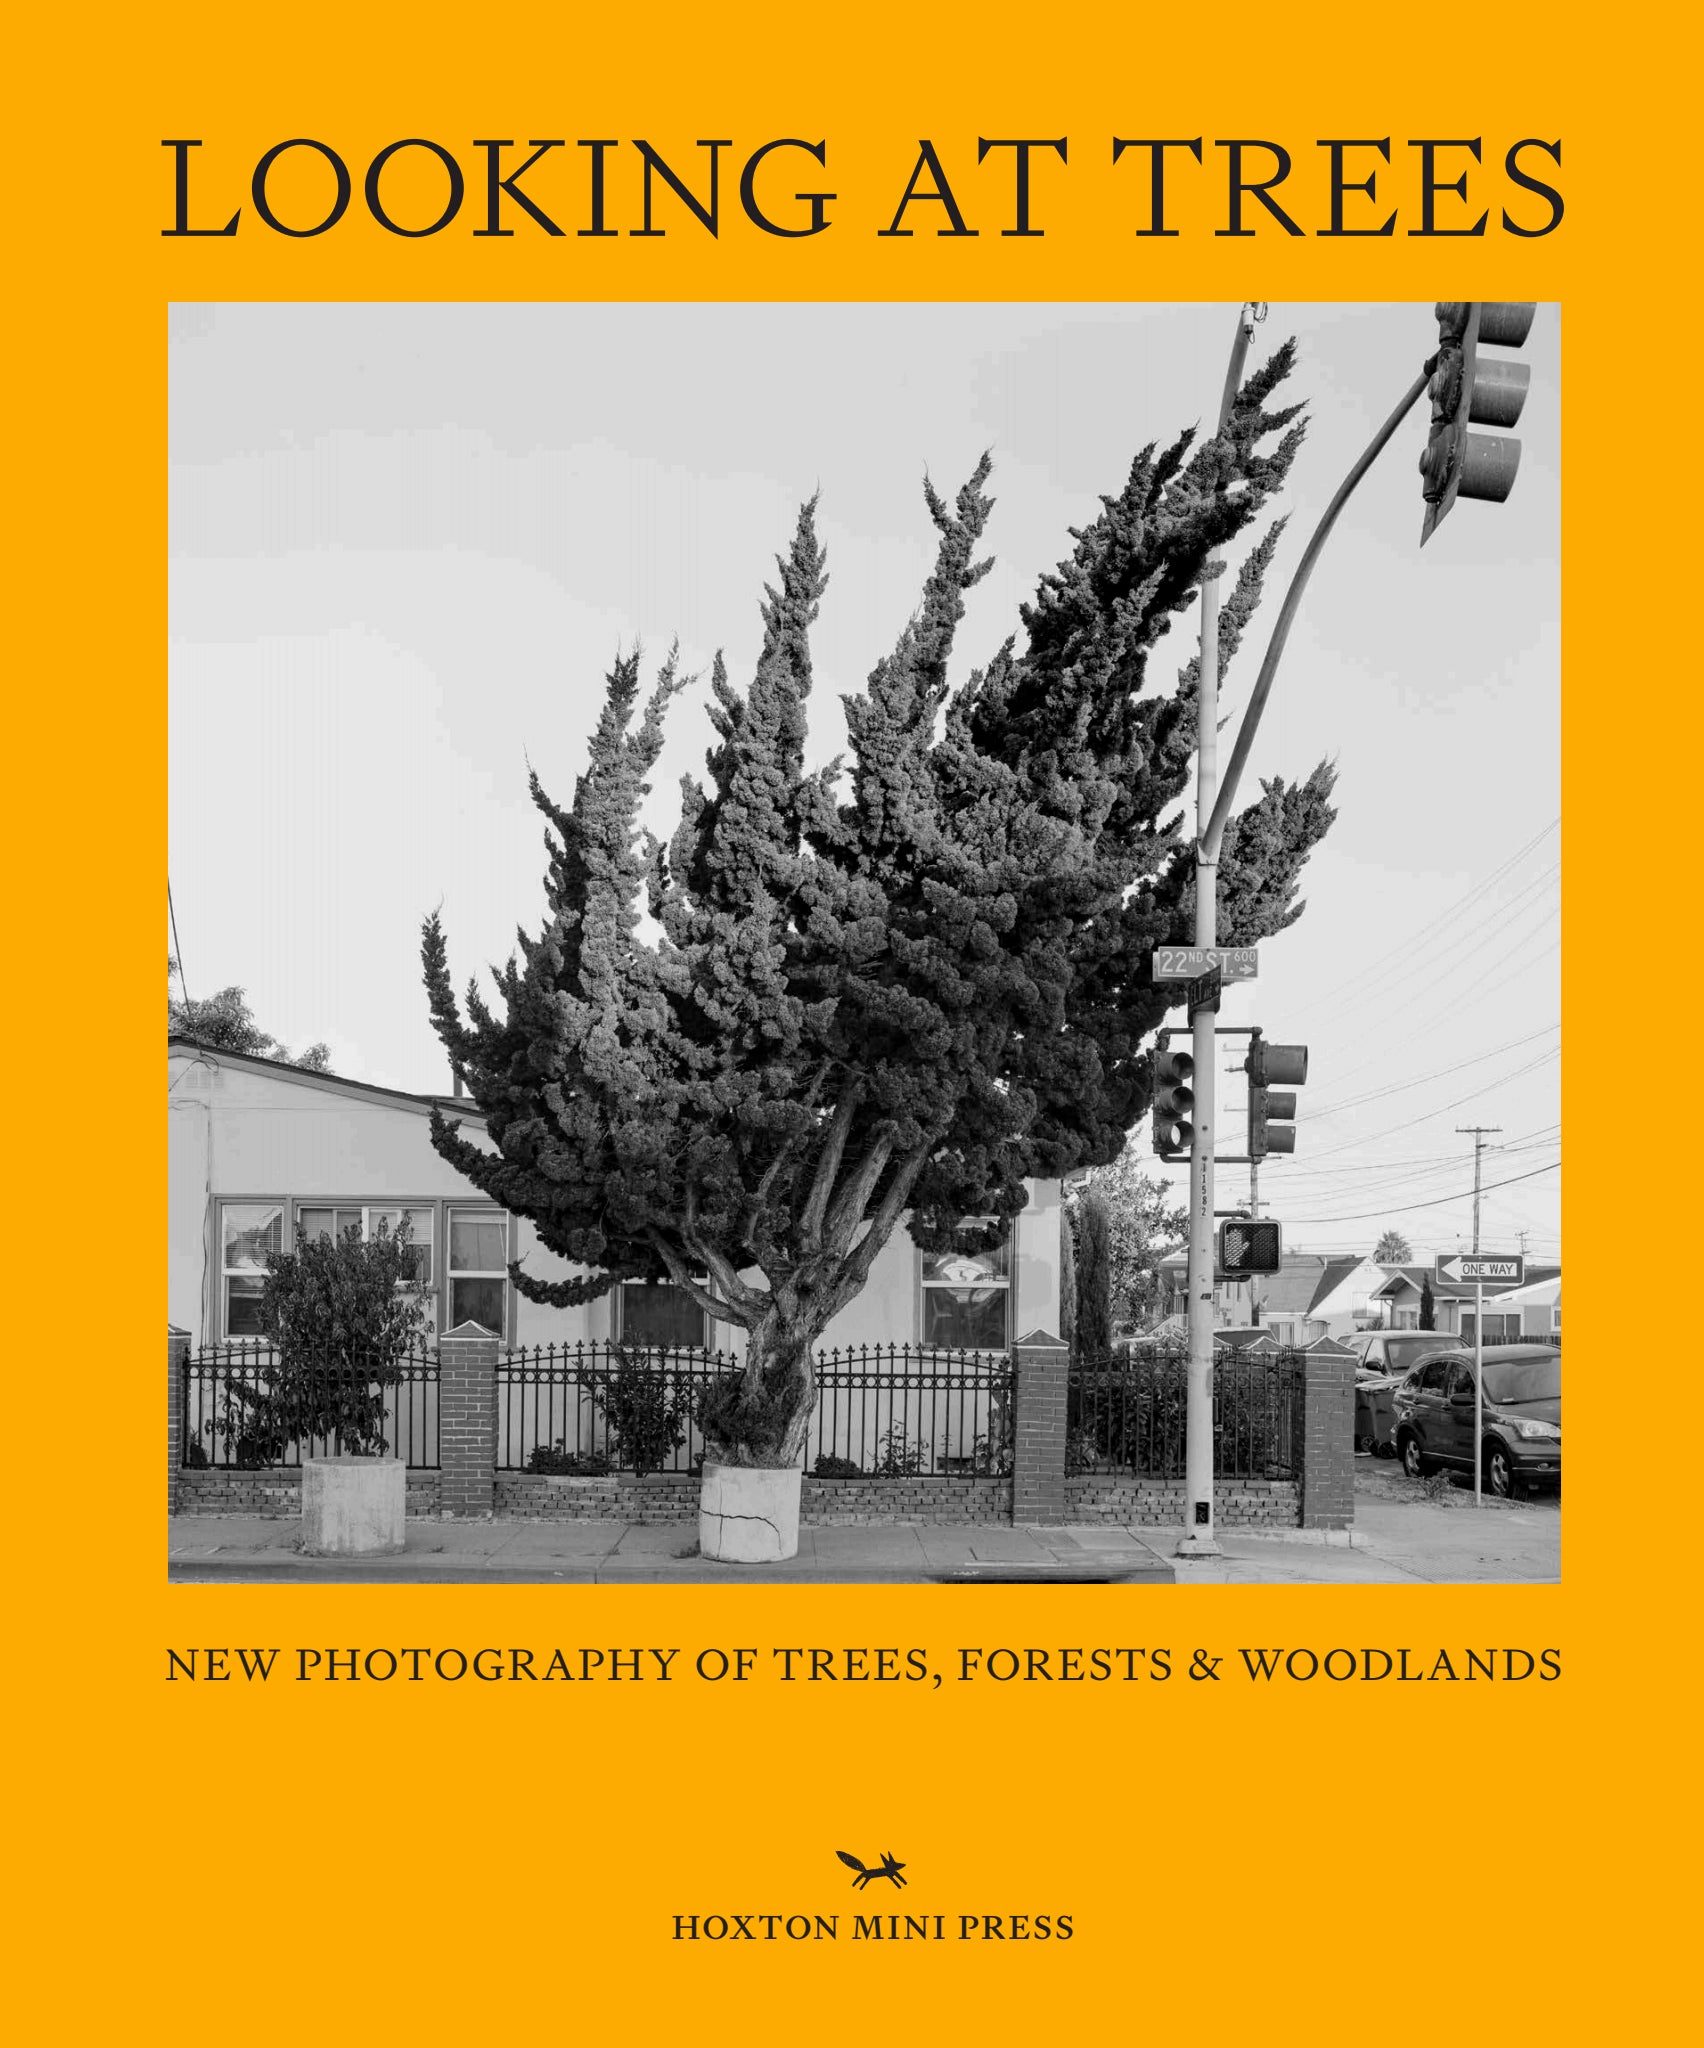 The cover of Sophie Howarth’s ‘Looking at Trees’